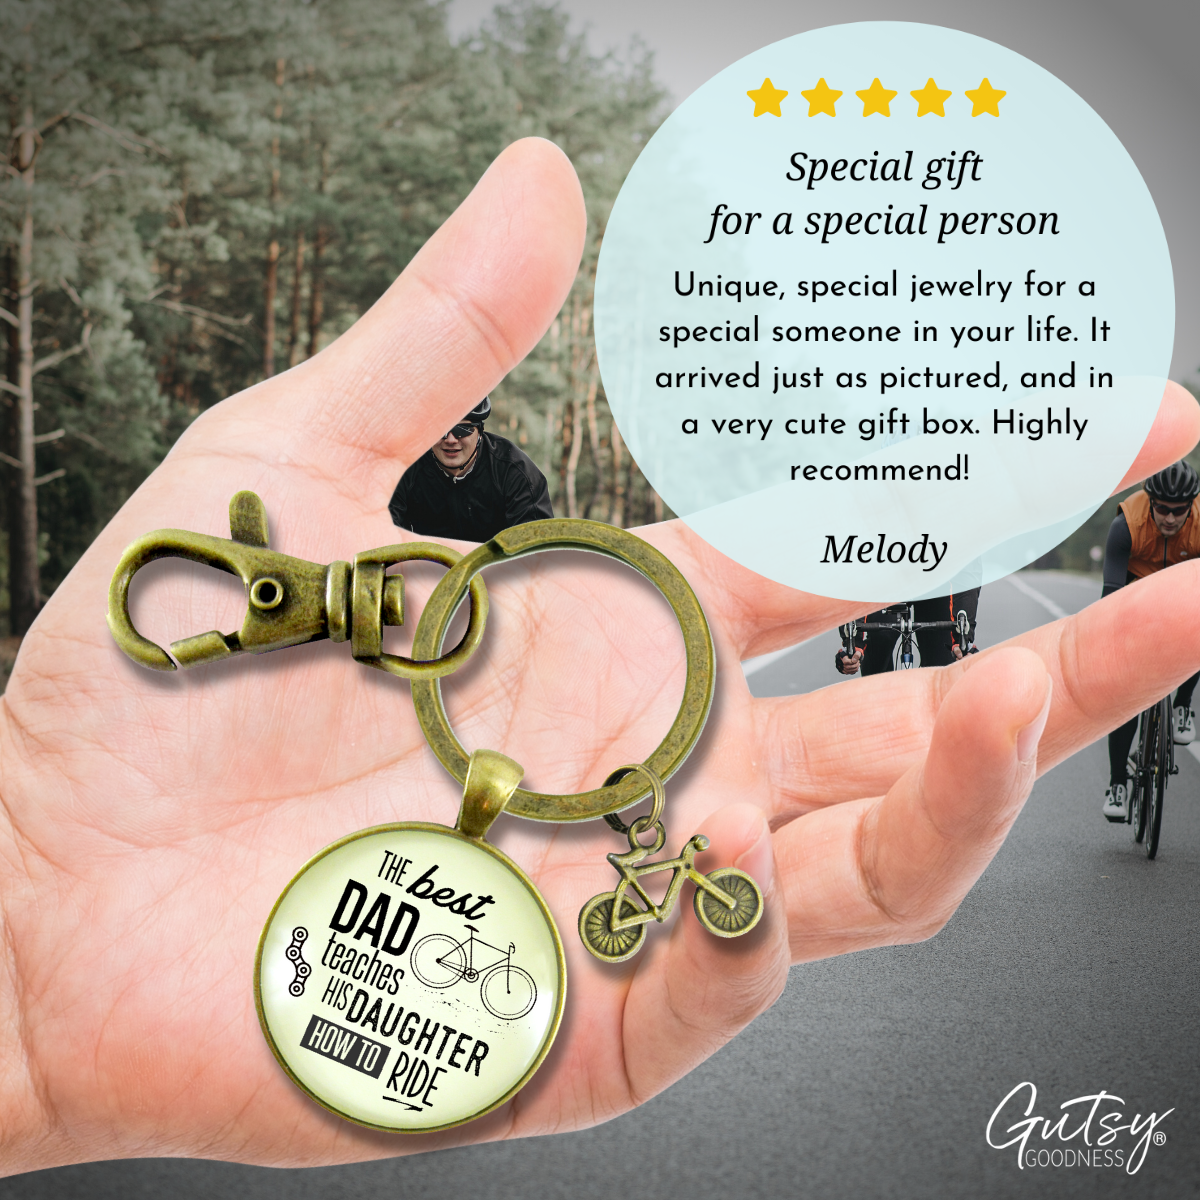 The Best Dad Teaches His Daughter How to Ride Cyclist Keychain Father From Daughter - Gutsy Goodness Handmade Jewelry;The Best Dad Teaches His Daughter How To Ride Cyclist Keychain Father From Daughter - Gutsy Goodness Handmade Jewelry Gifts